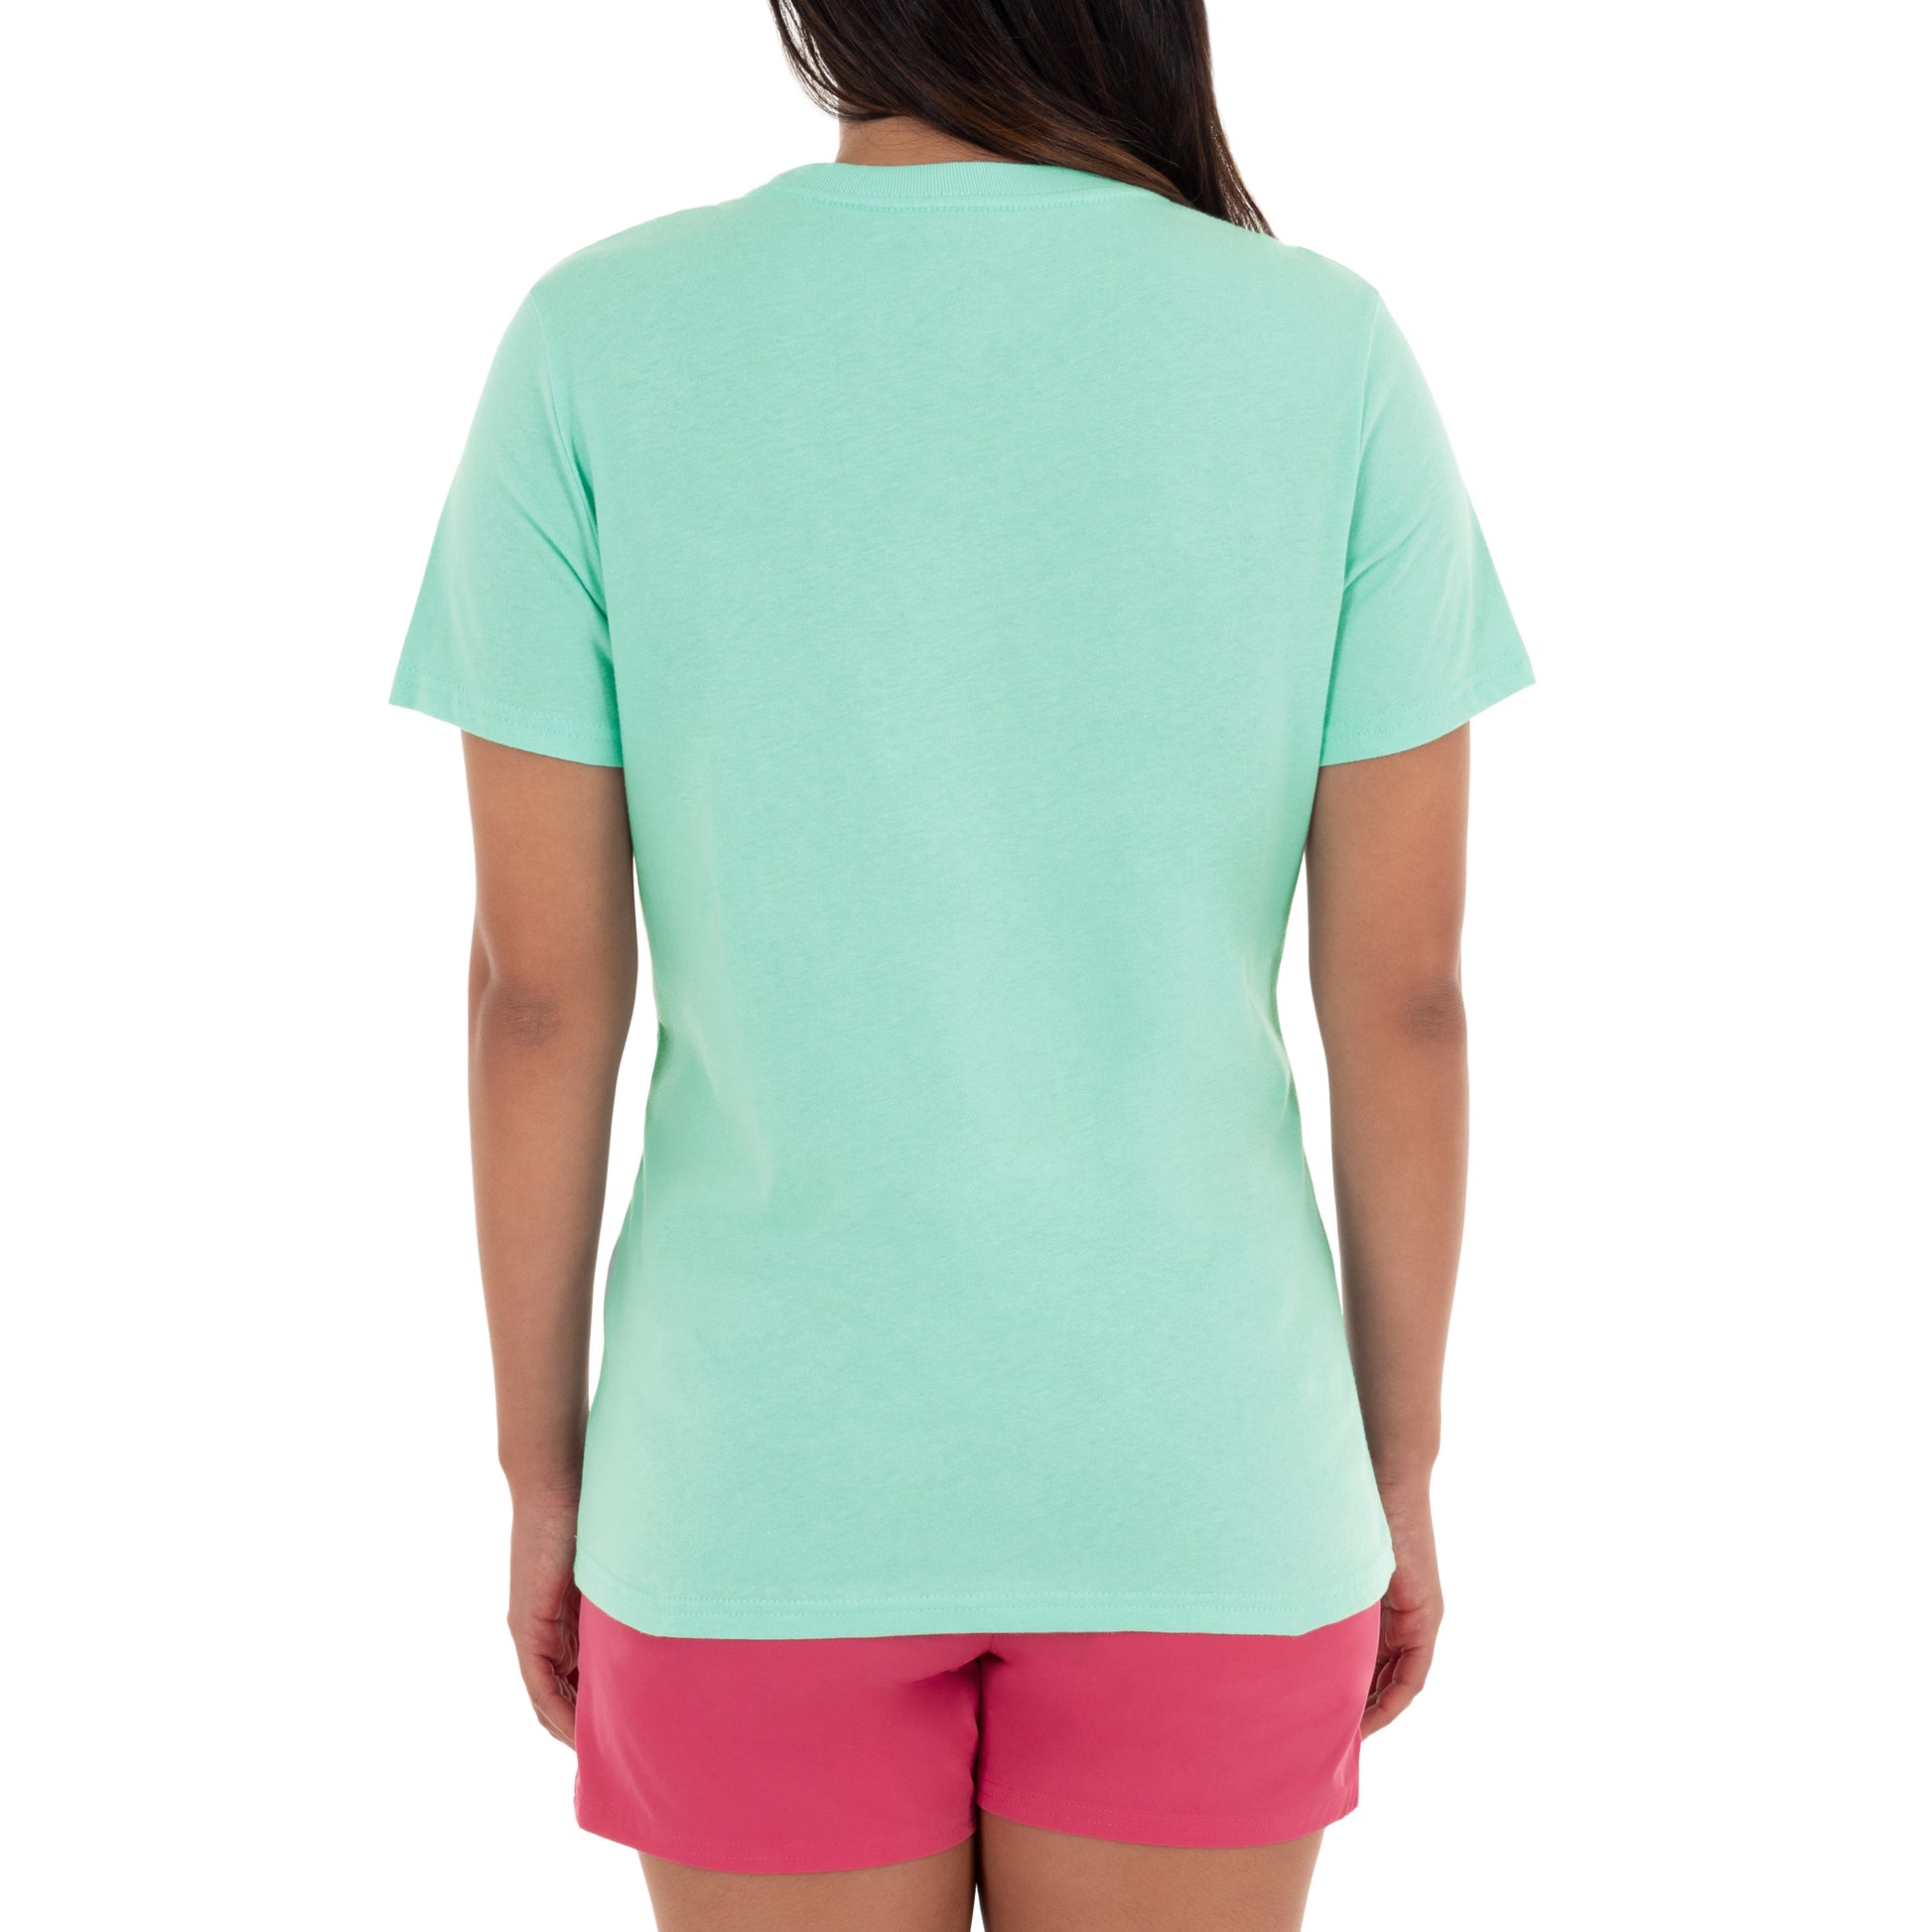 Chico's Womens Teal TShirt Short Sleeve 3 Buttons On Back Size X